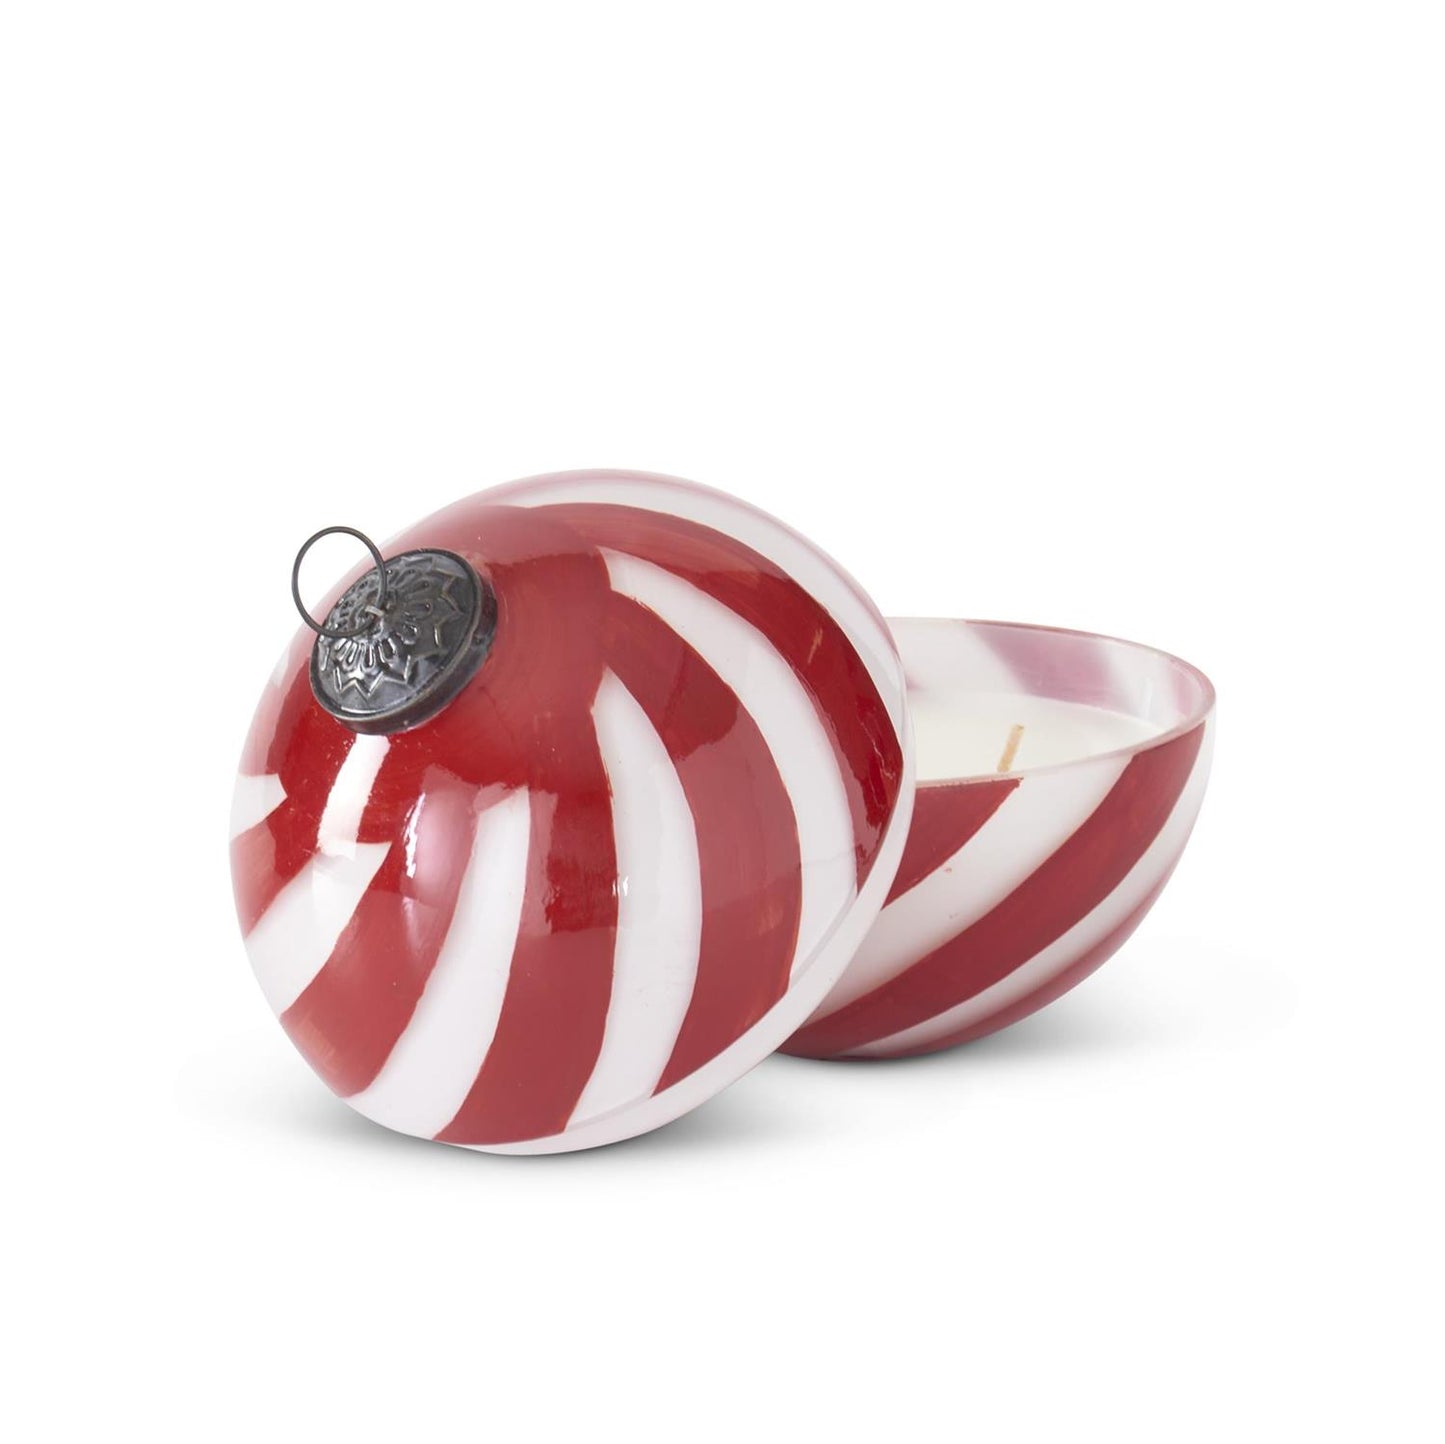 5 INCH RED & WHITE STRIPED FILLED ORNAMENT CANDLES (2 SCENTS)